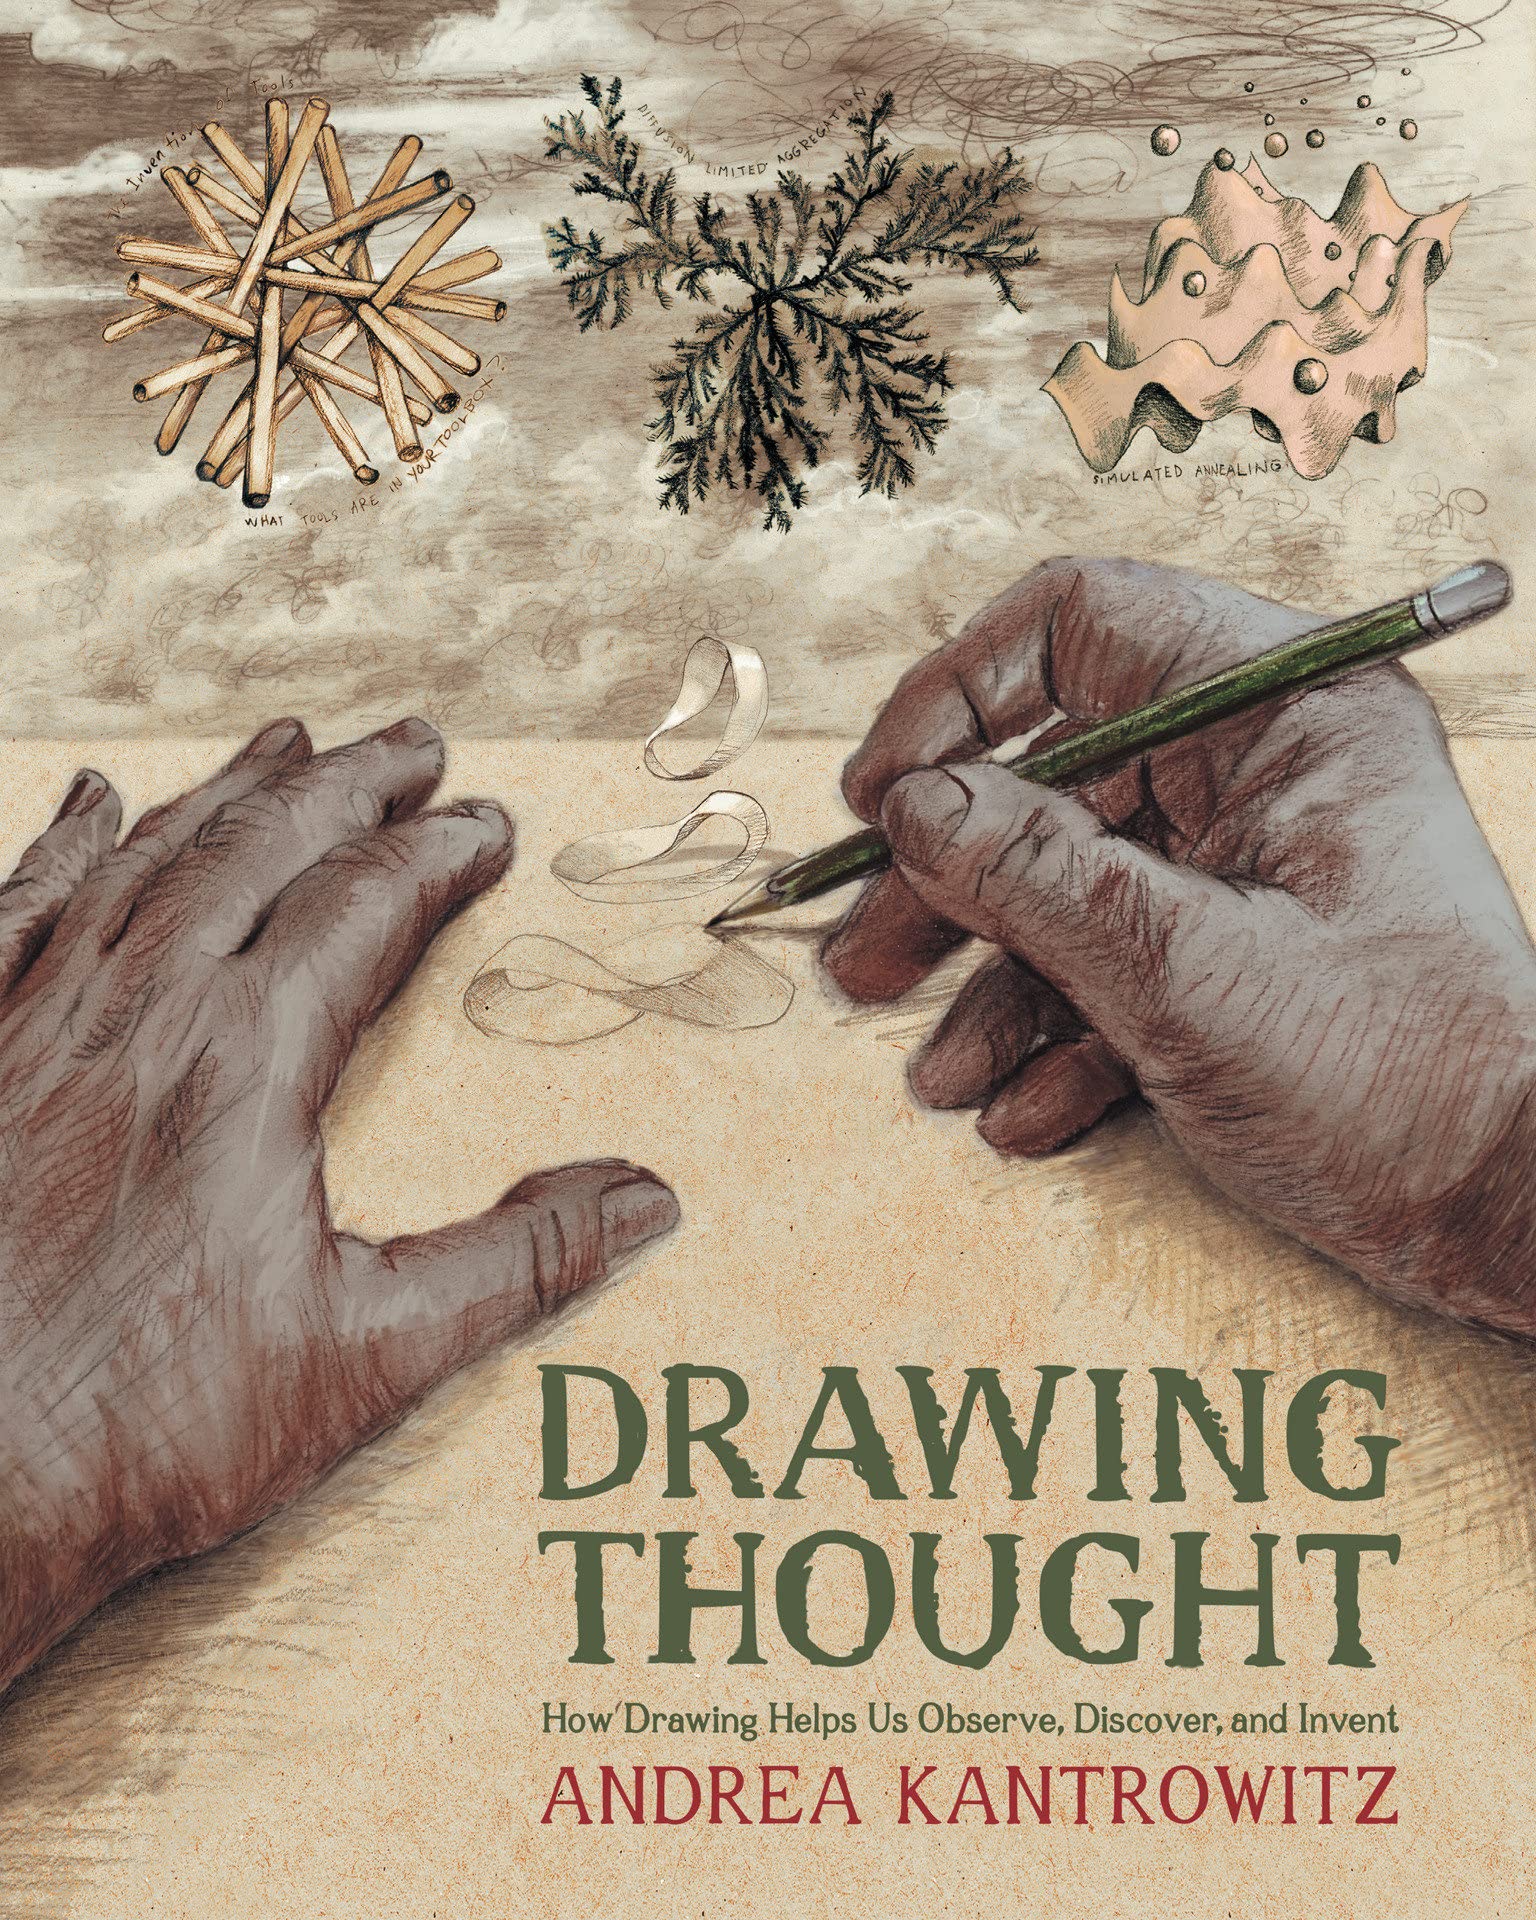 Drawing Thought | Andrea Kantrowitz